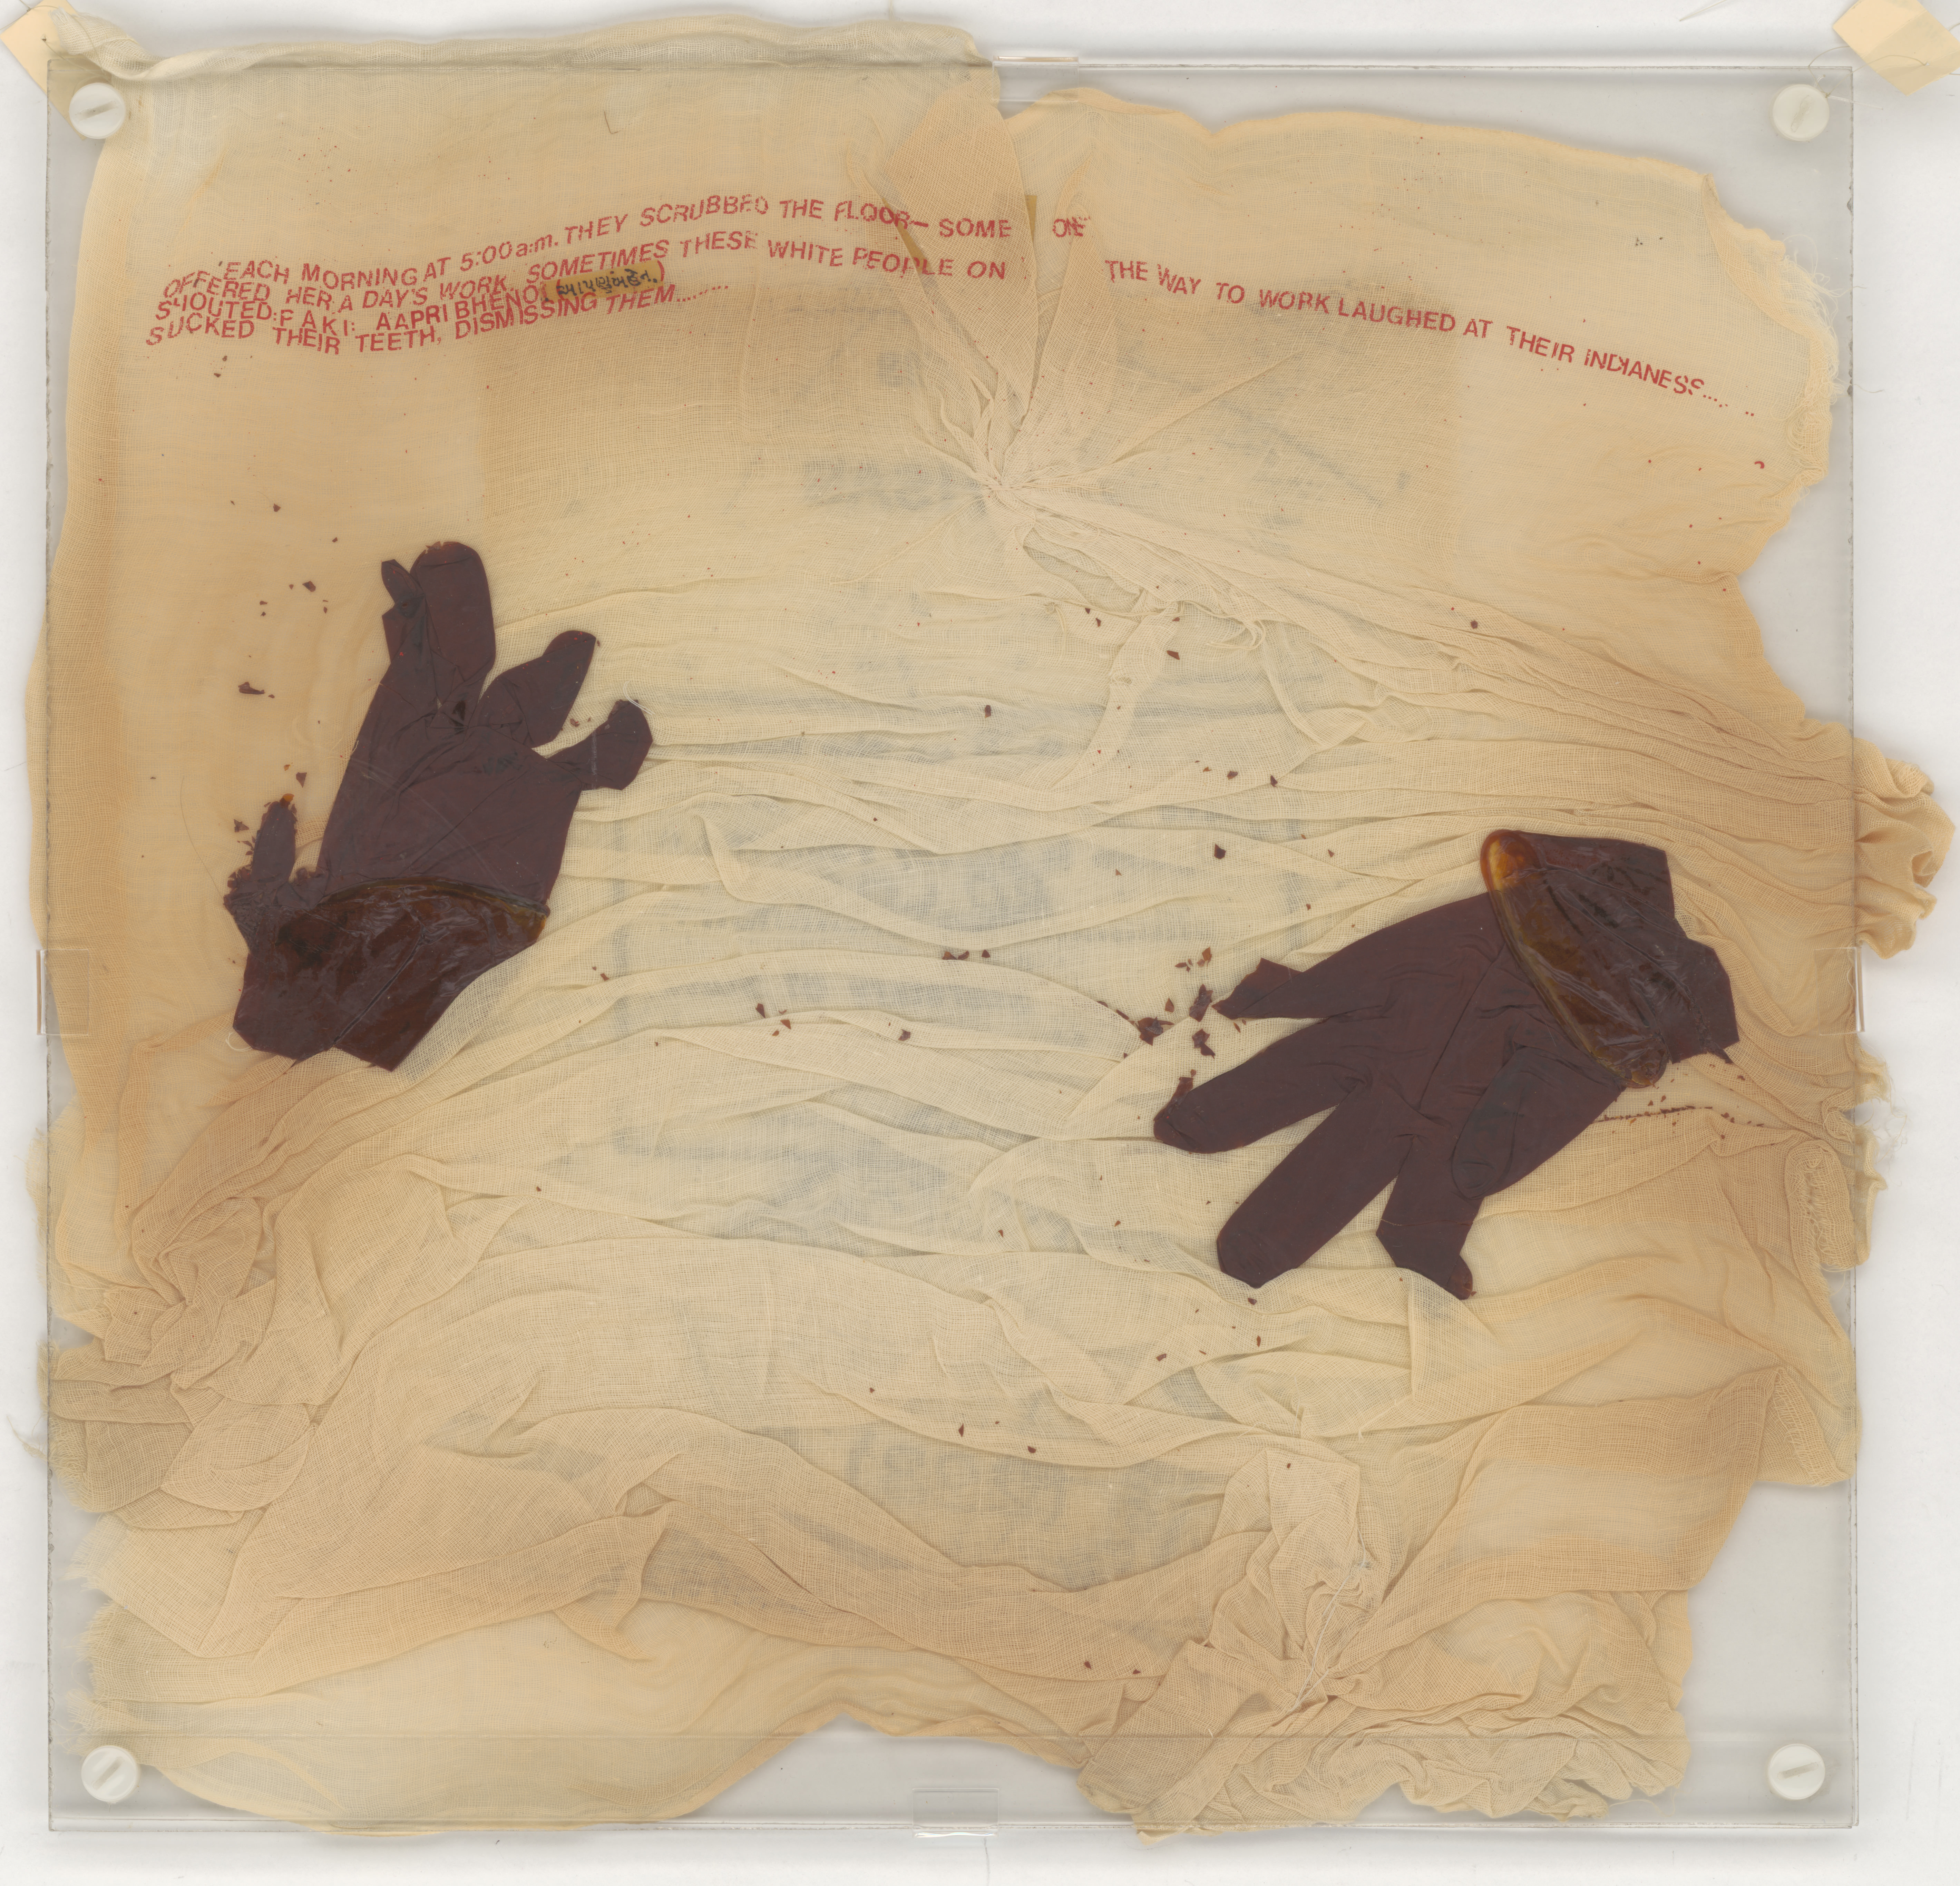 1987, installation consisting of eight hand-colored, gelatin-silver prints; text printed on muslin sandwiched between the photographs; latex gloves; Plexiglass; photocopied passports on the muslin; turmeric and chilli powder scattered on the floor, Perspex height: 49.7 cm, width: 50.8 cm, depth: 0.07 cm. Collection of Victoria and Albert Museum, London (PH.7208:4-1987).